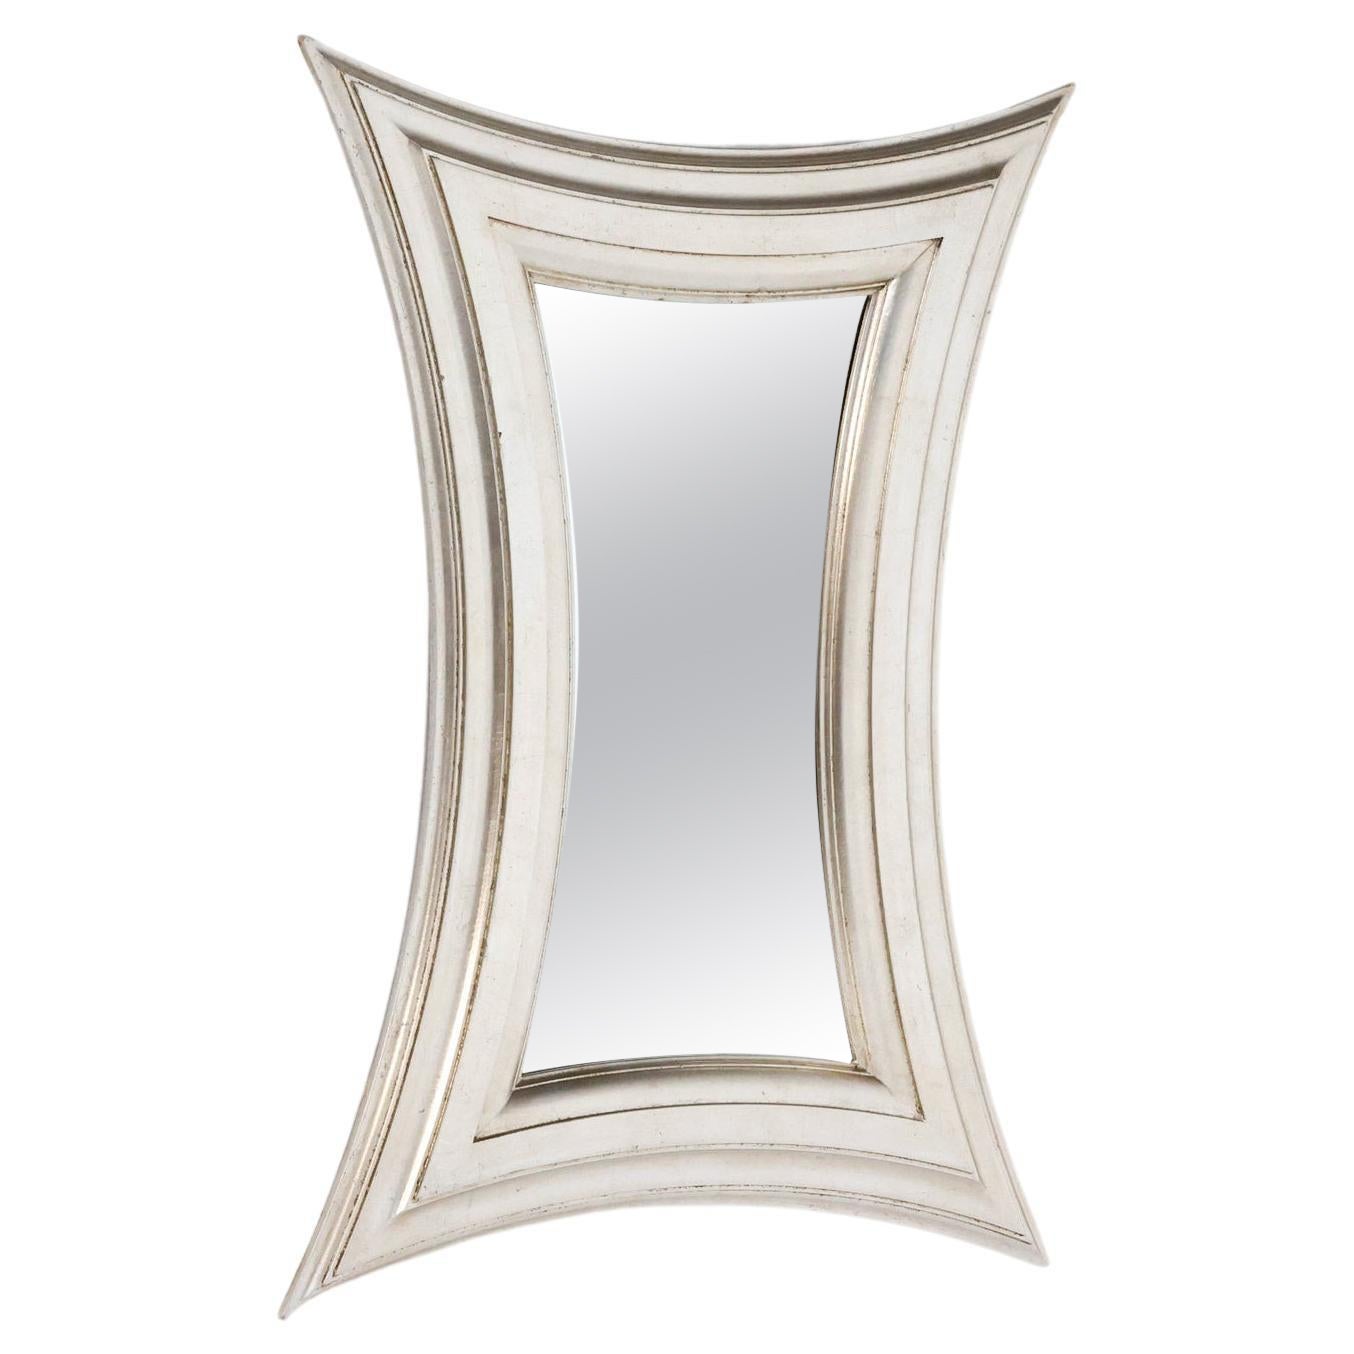 Hollywood Regency Mirror with Metal Frame, Organic Deconstructed Rectangle, 1940